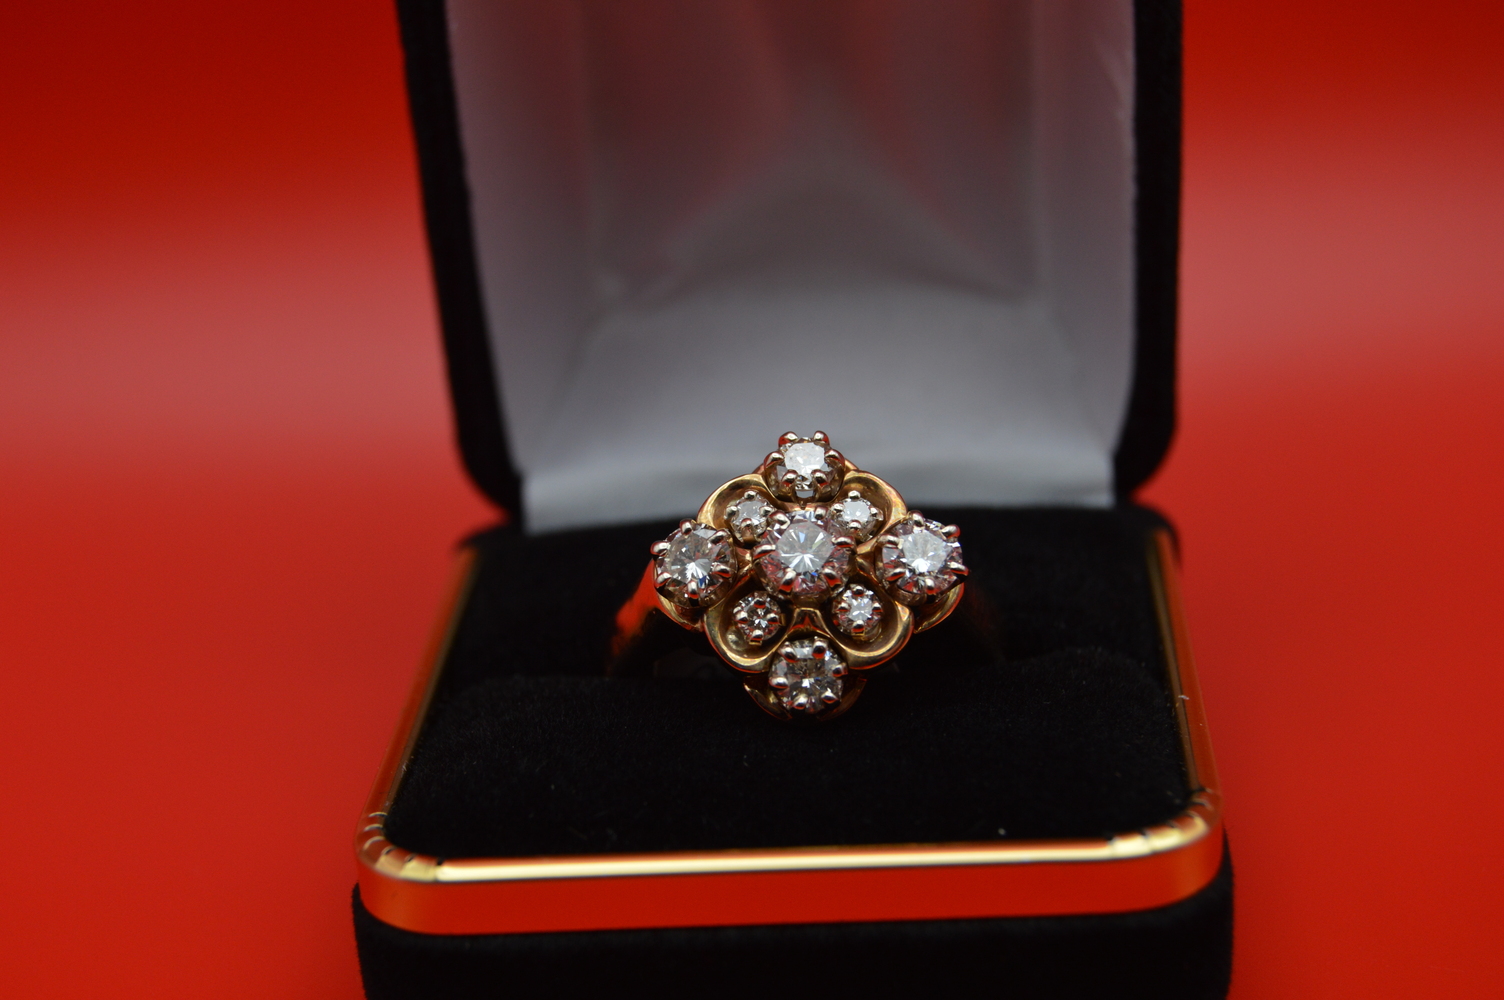  14kt  Yellow Gold Cluster Diamond Ring Approx 2.5 TDW $1250.00